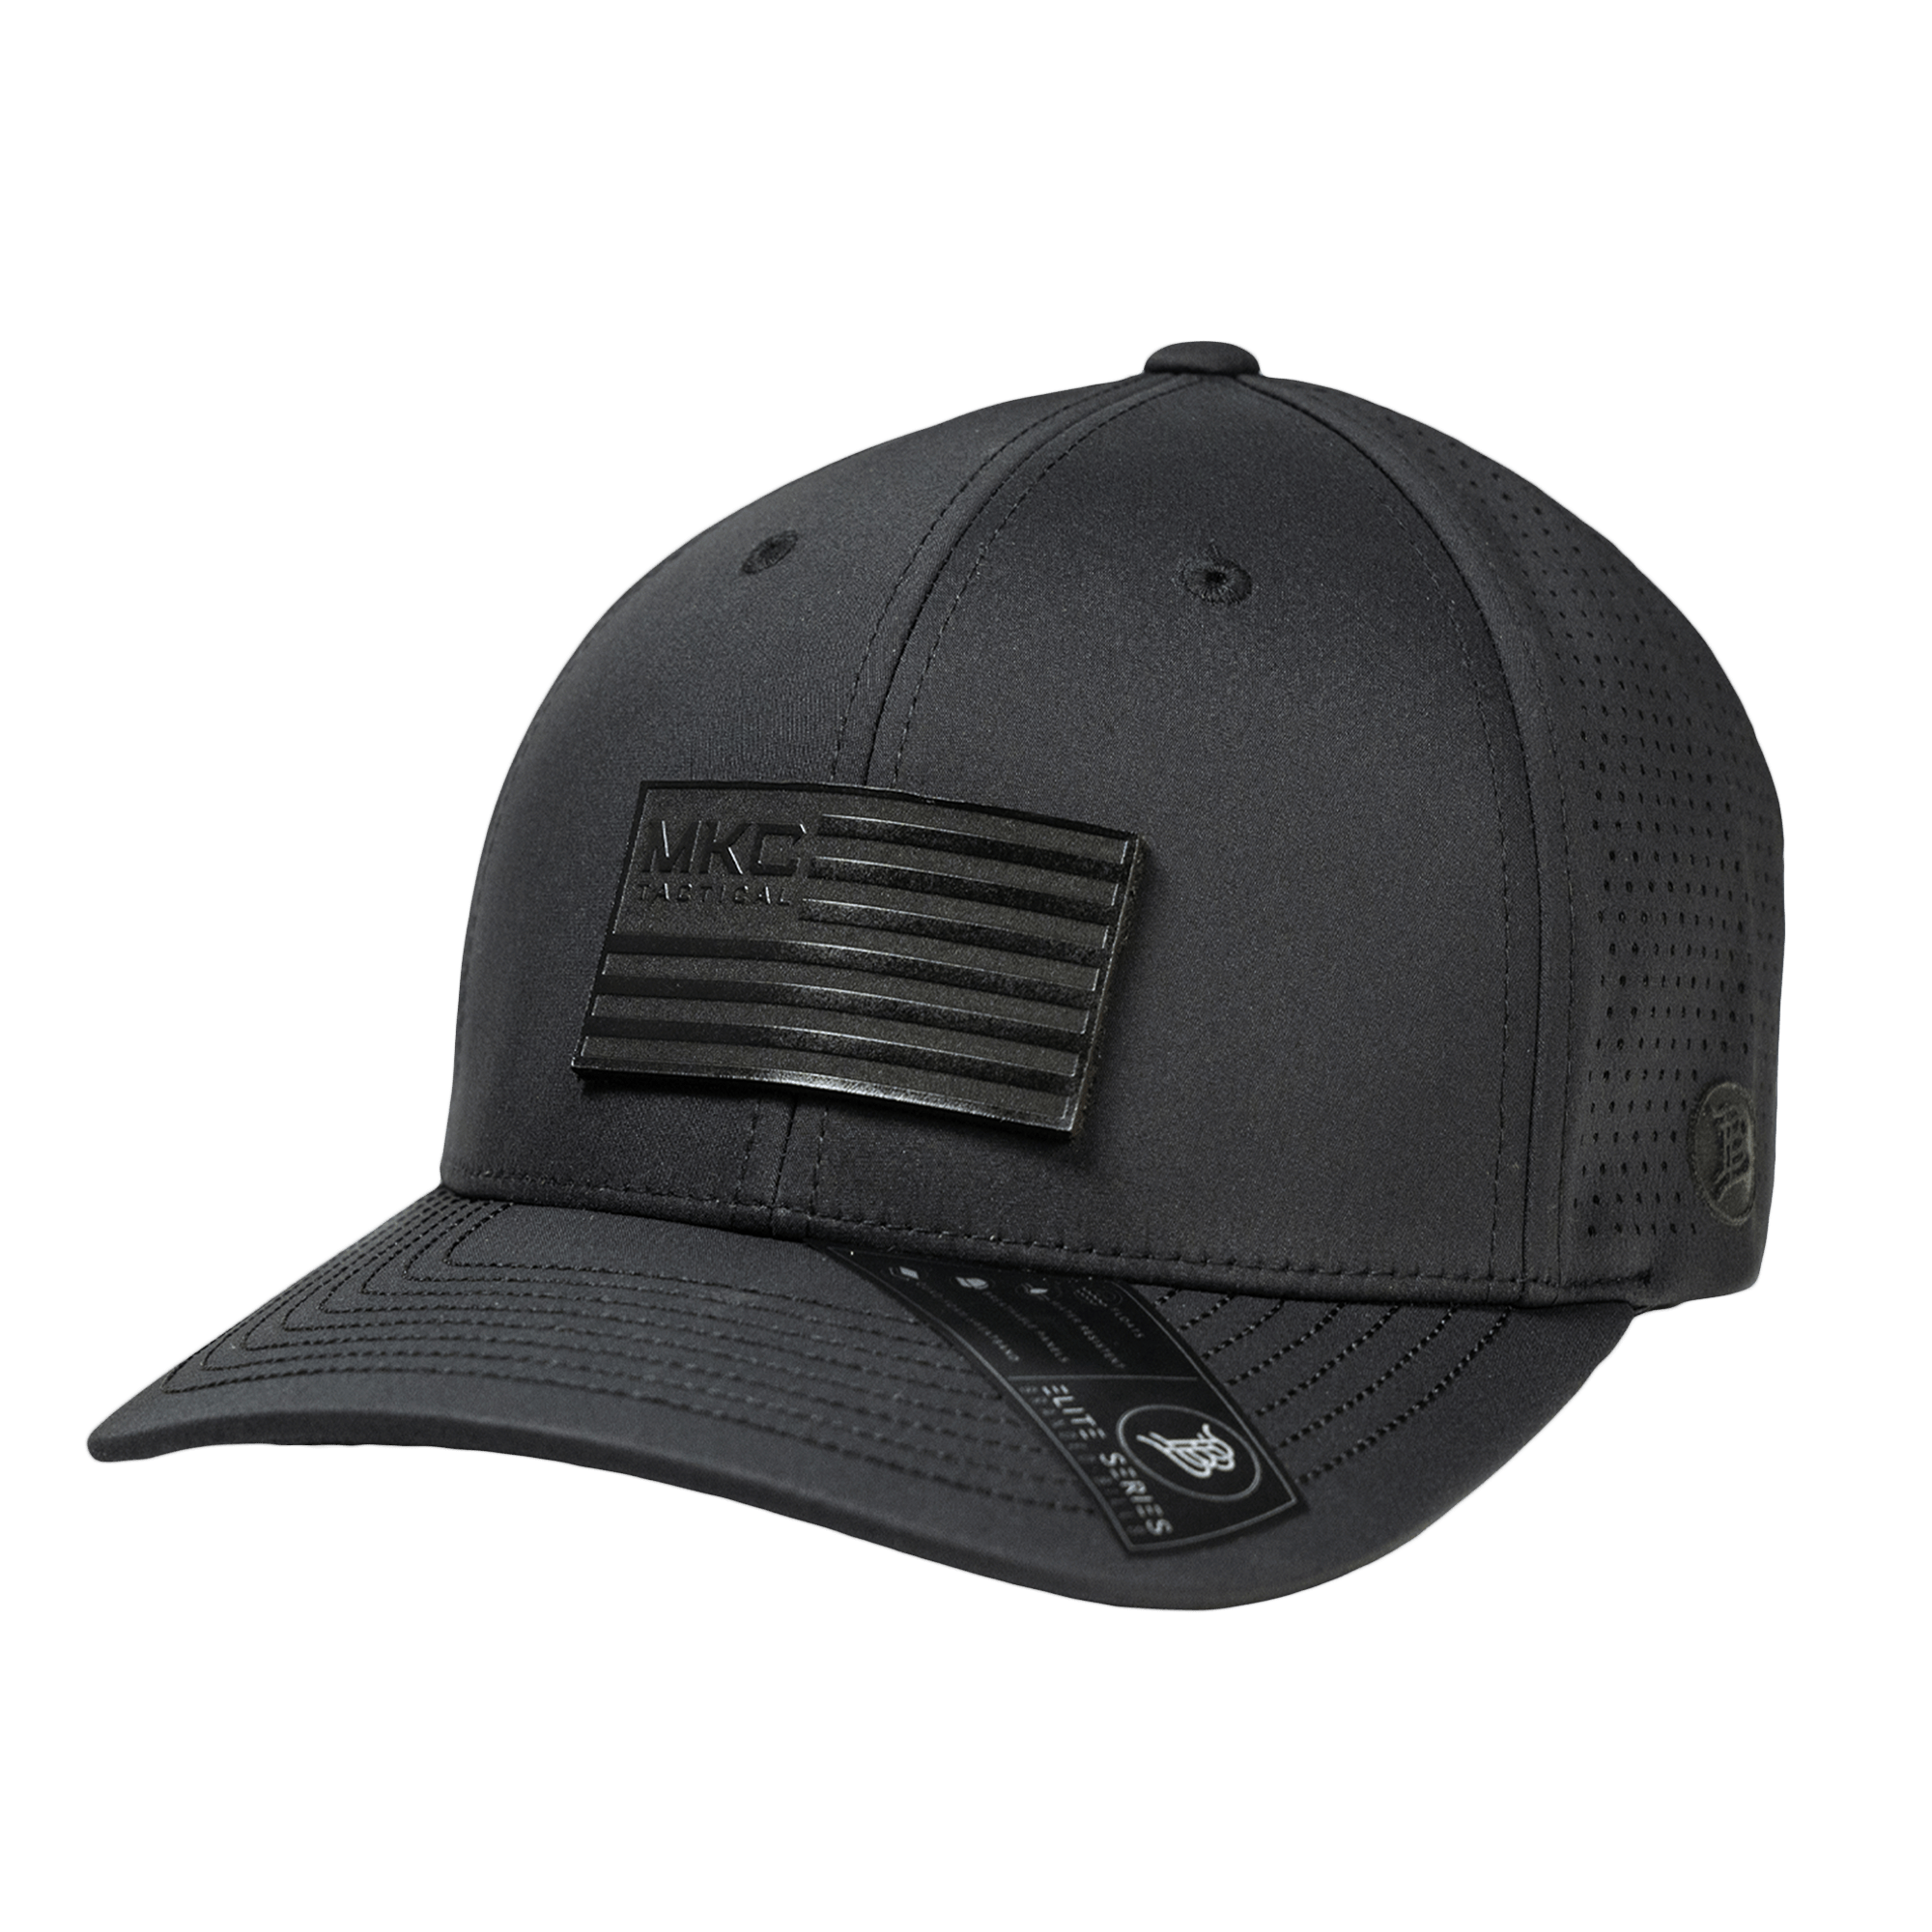 MKC TACTICAL OLD GLORY PRO HAT - BLACK